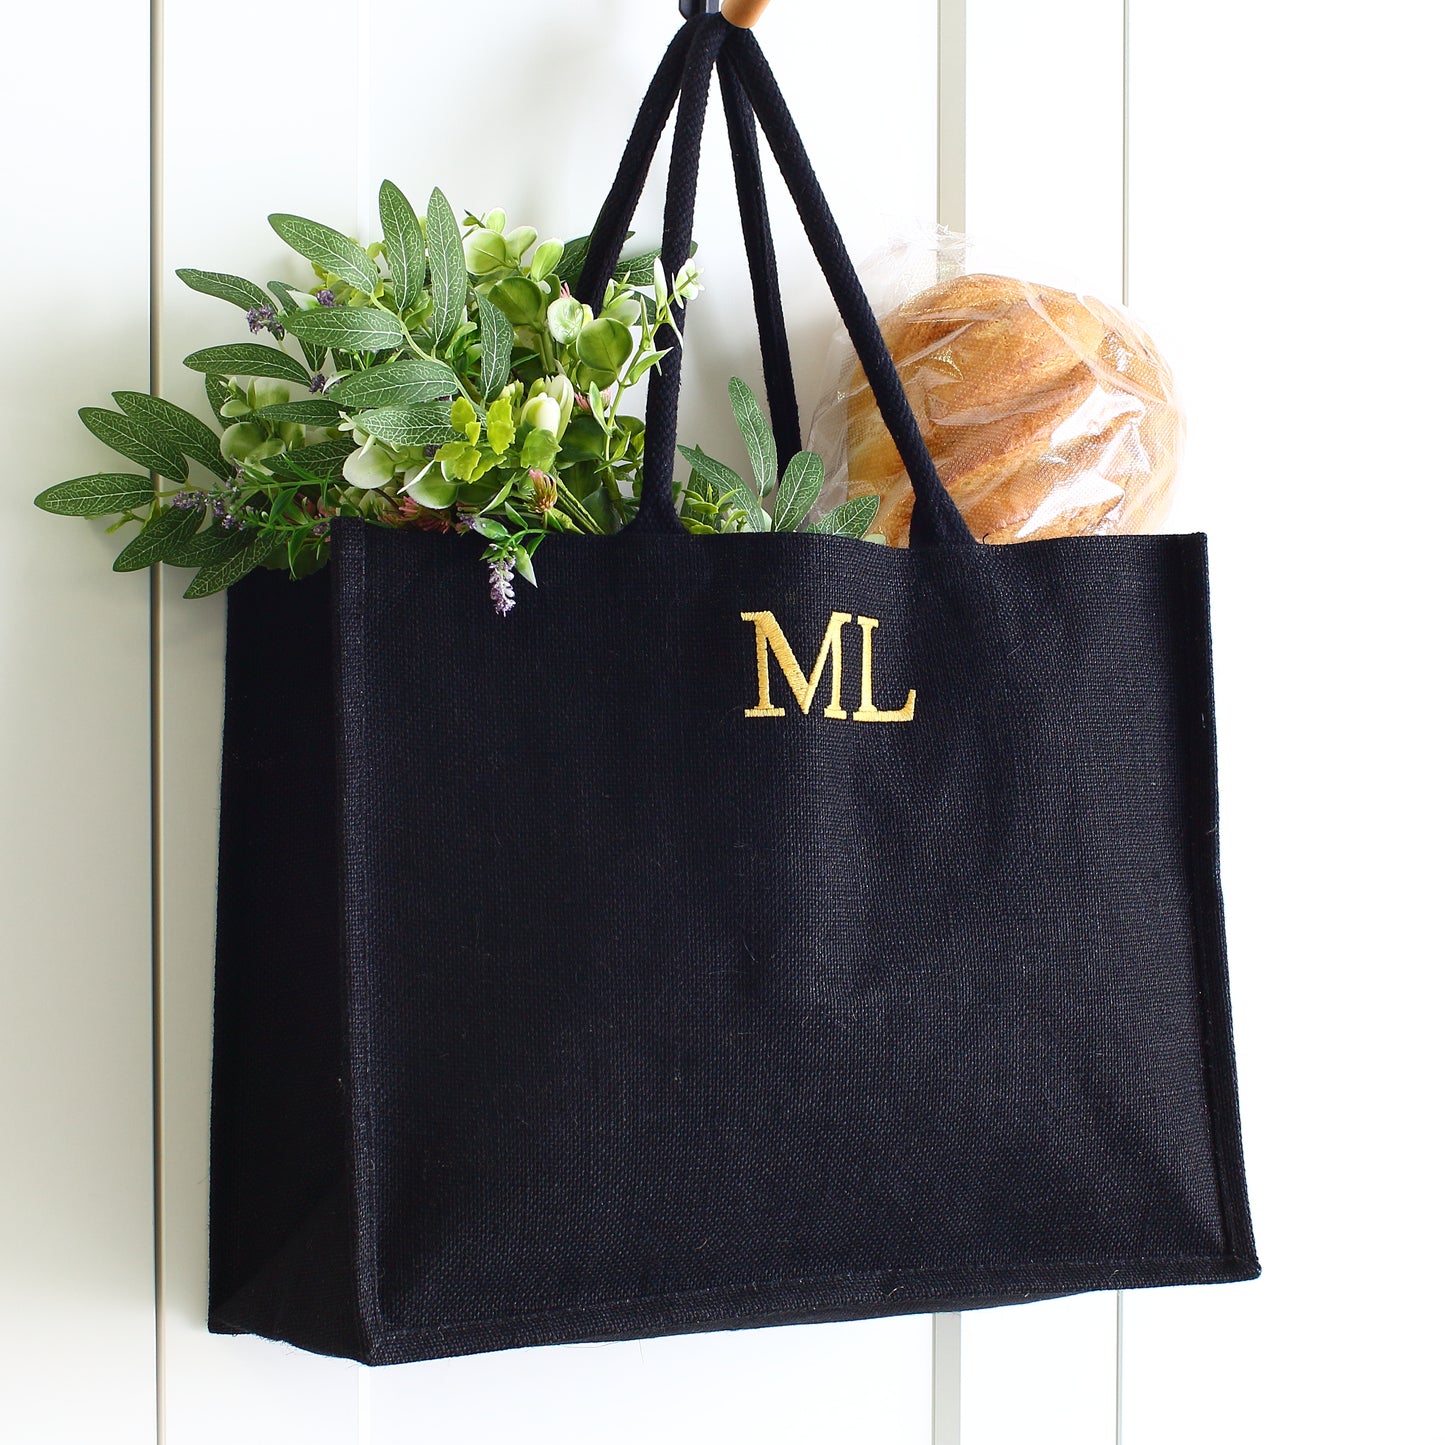 NEW - Embroidered Black Shopping Bag